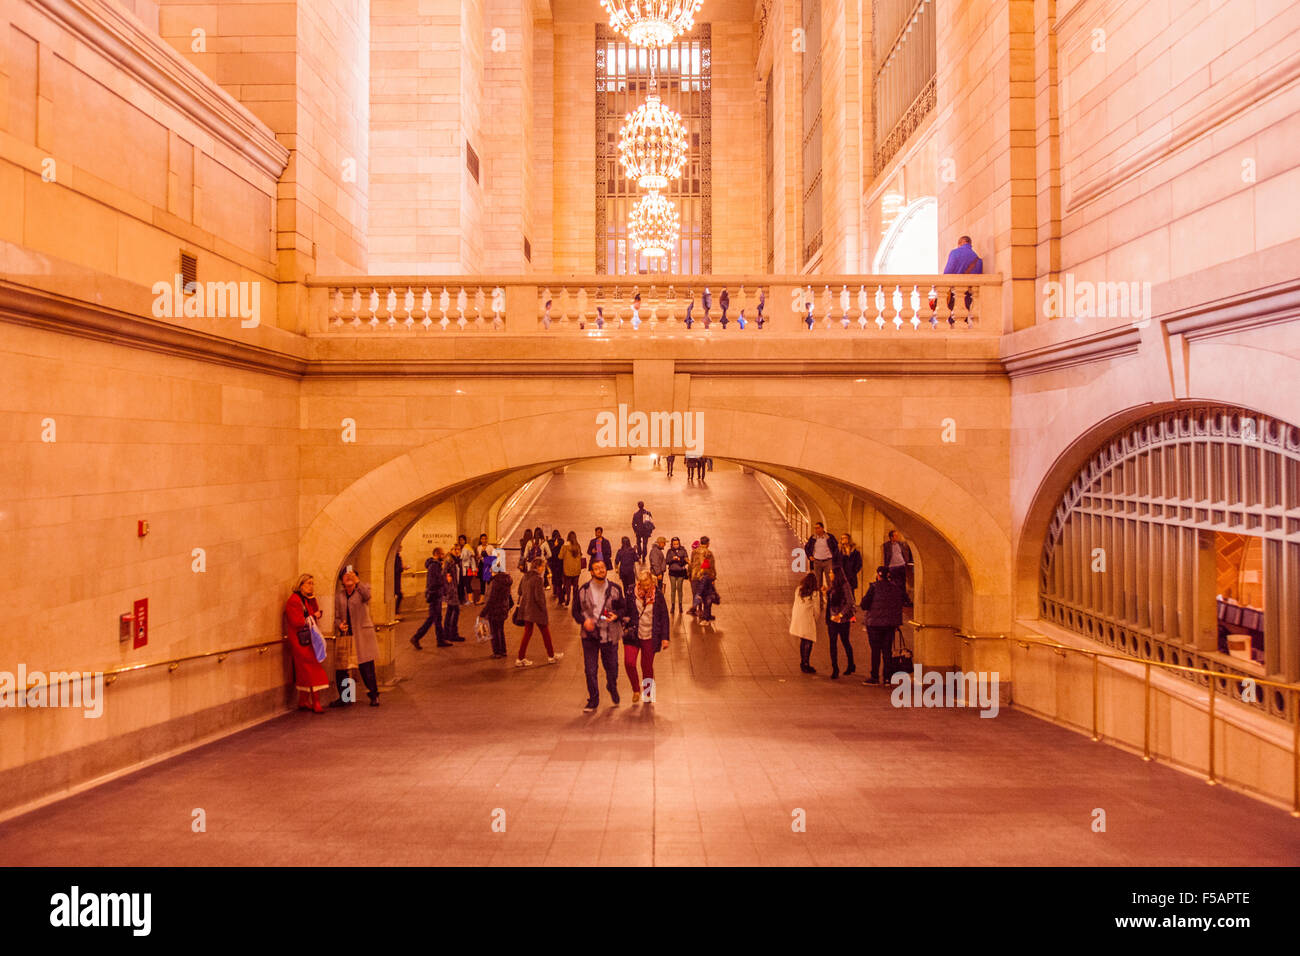 Whispering gallery in Grand Central terminal Station. Manhattan, New